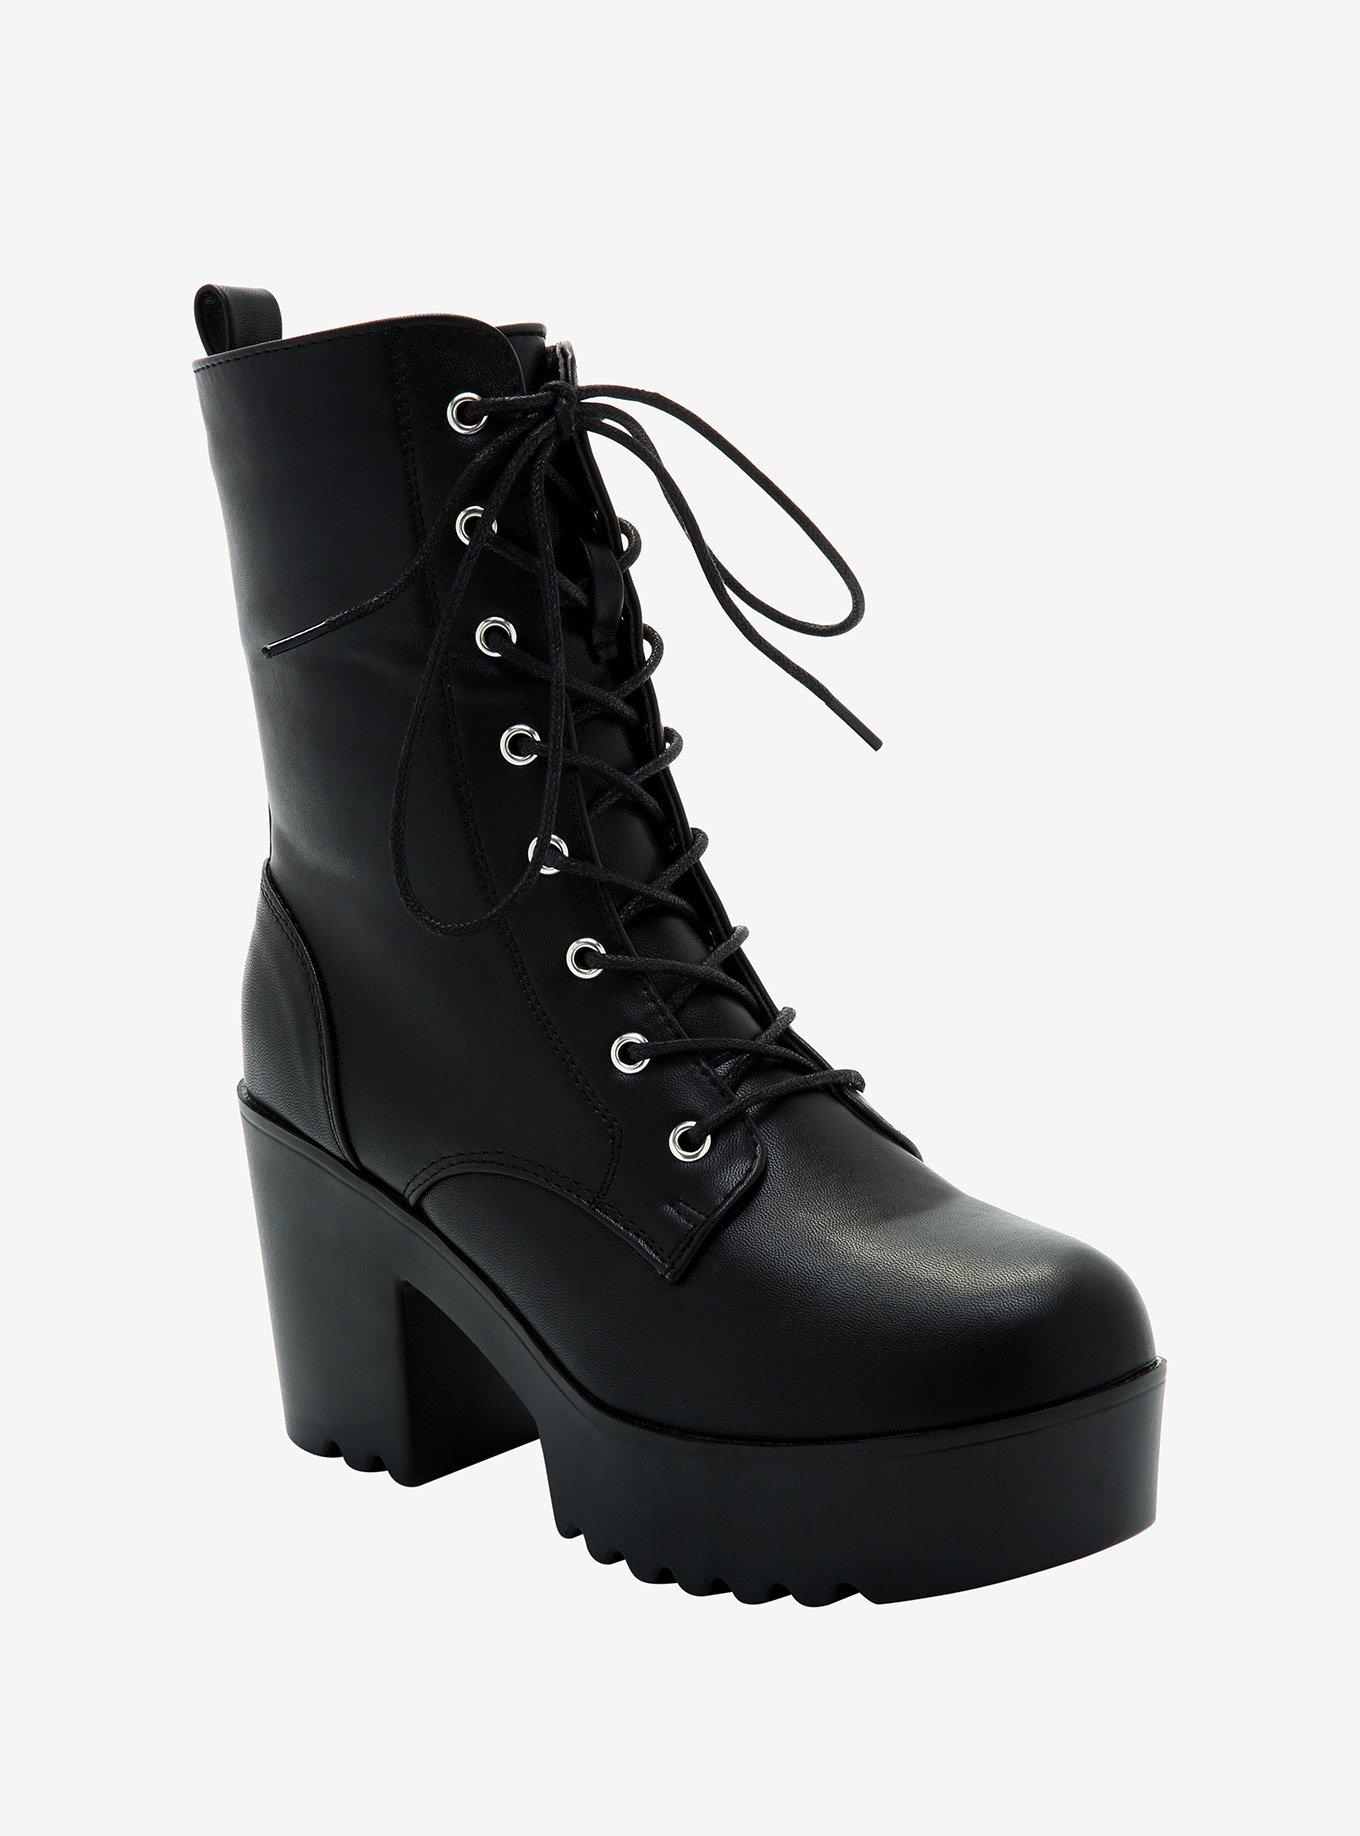 Black Lace Heeled Boots | Hot Topic